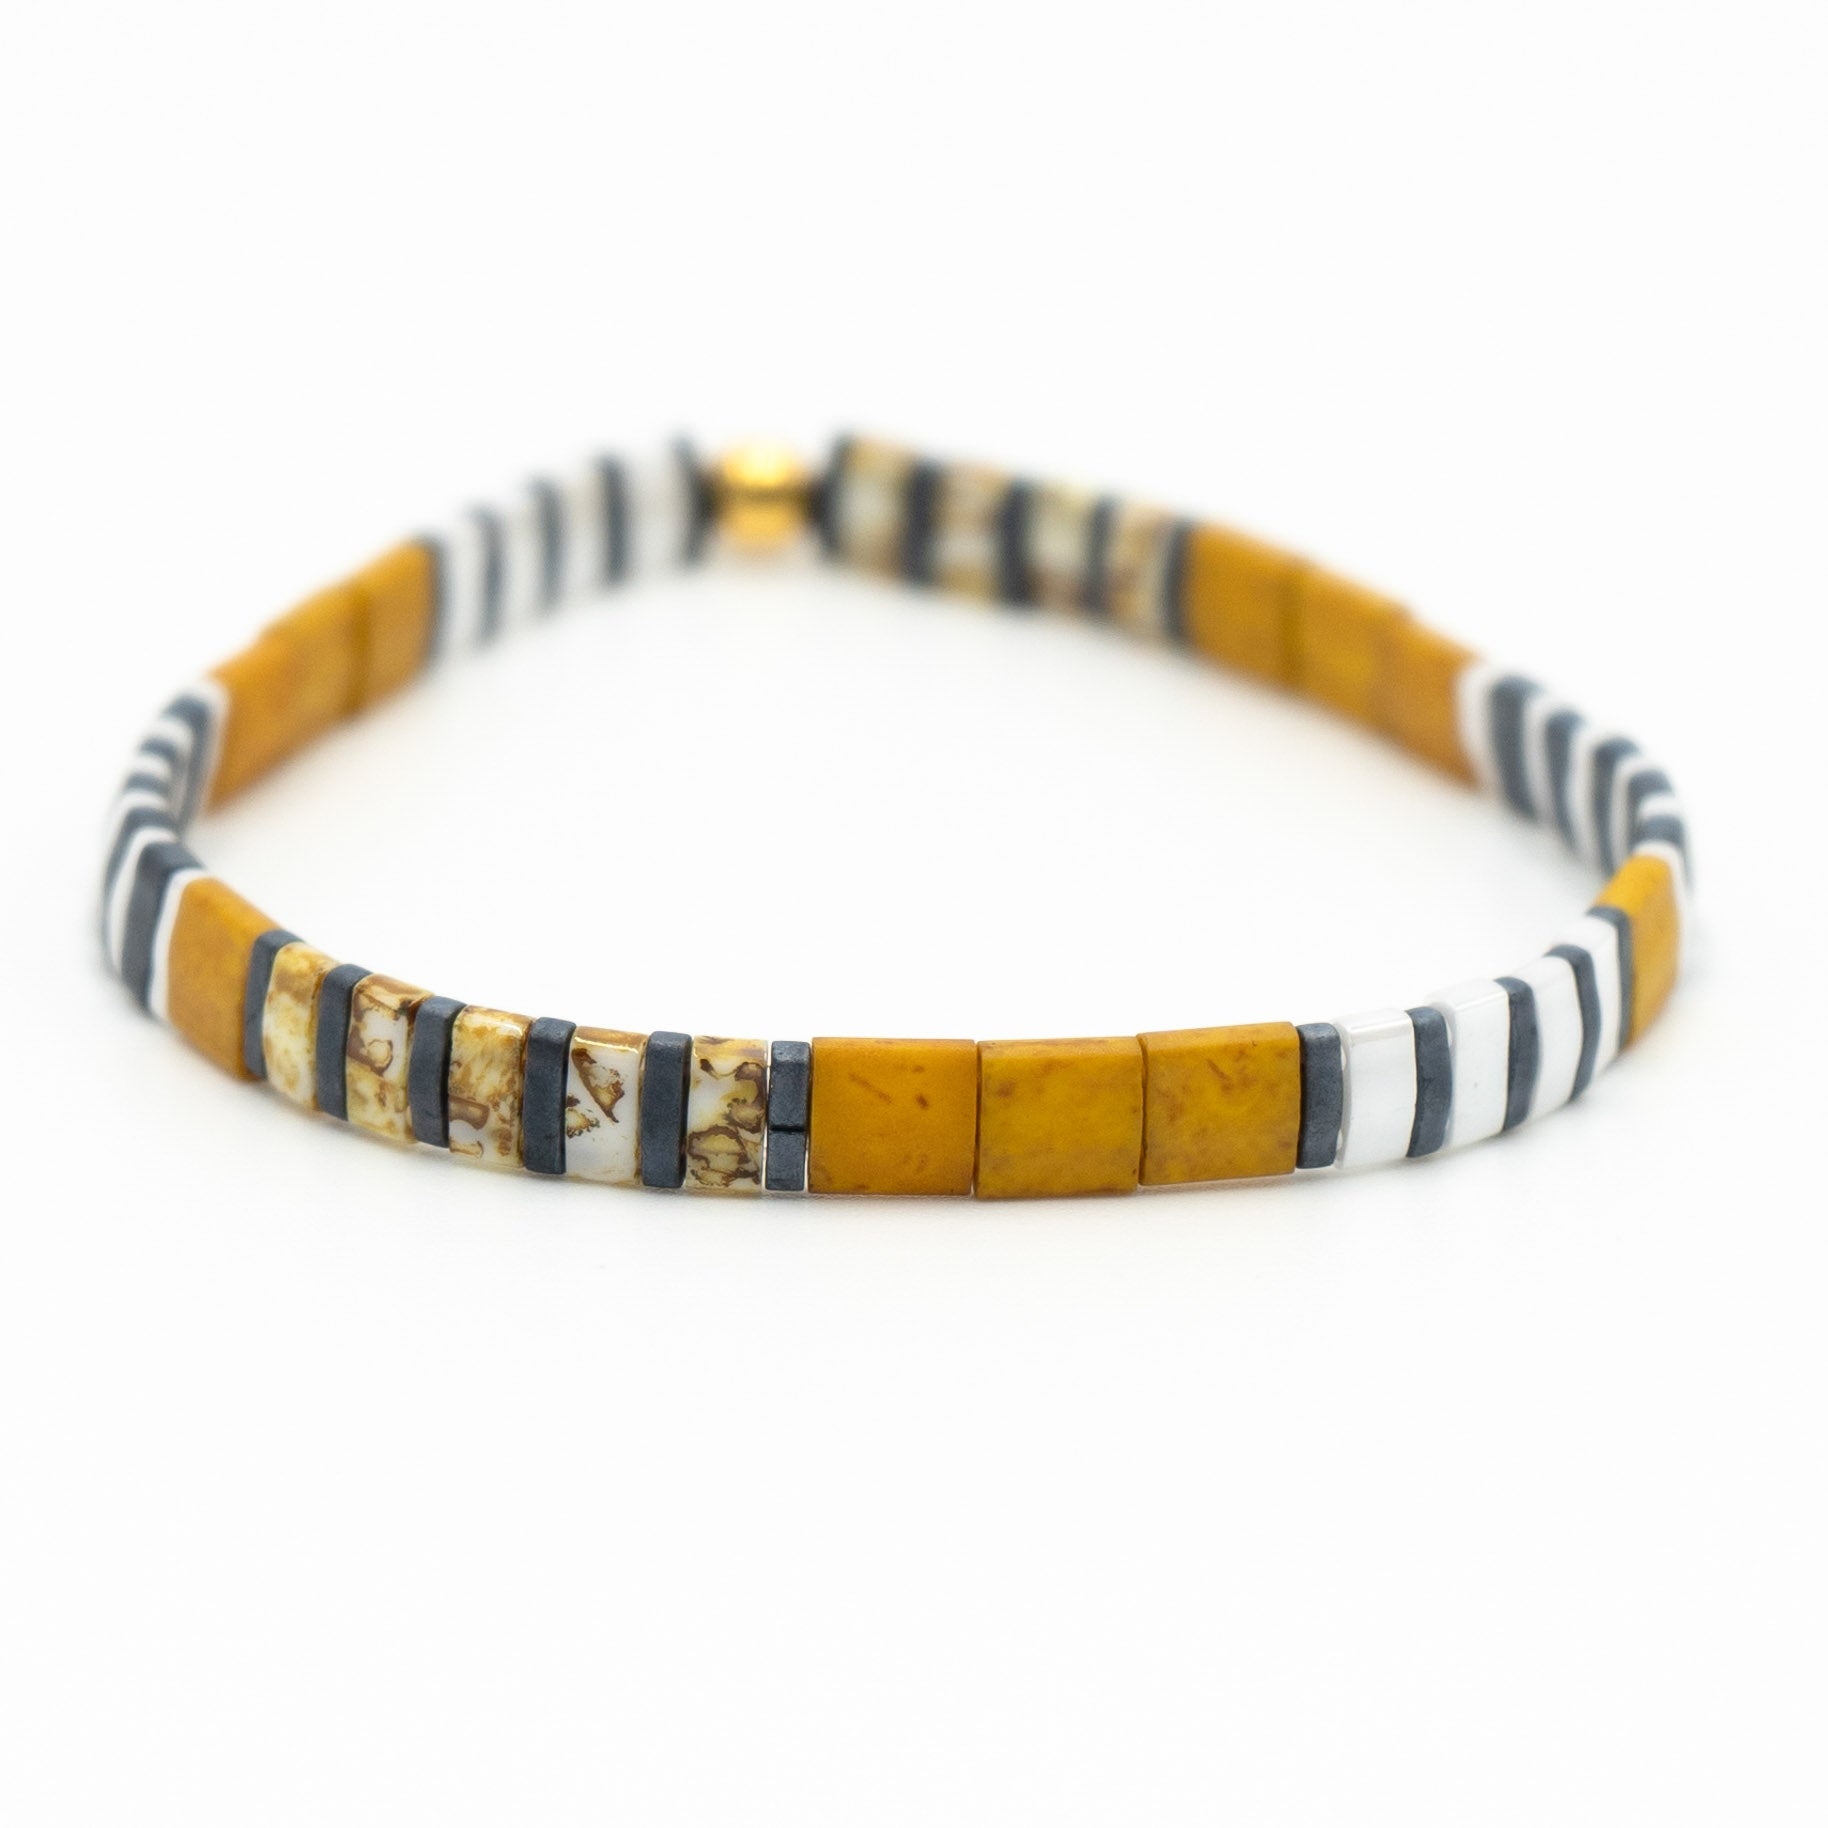 a yellow and black beaded bracelet on a white background